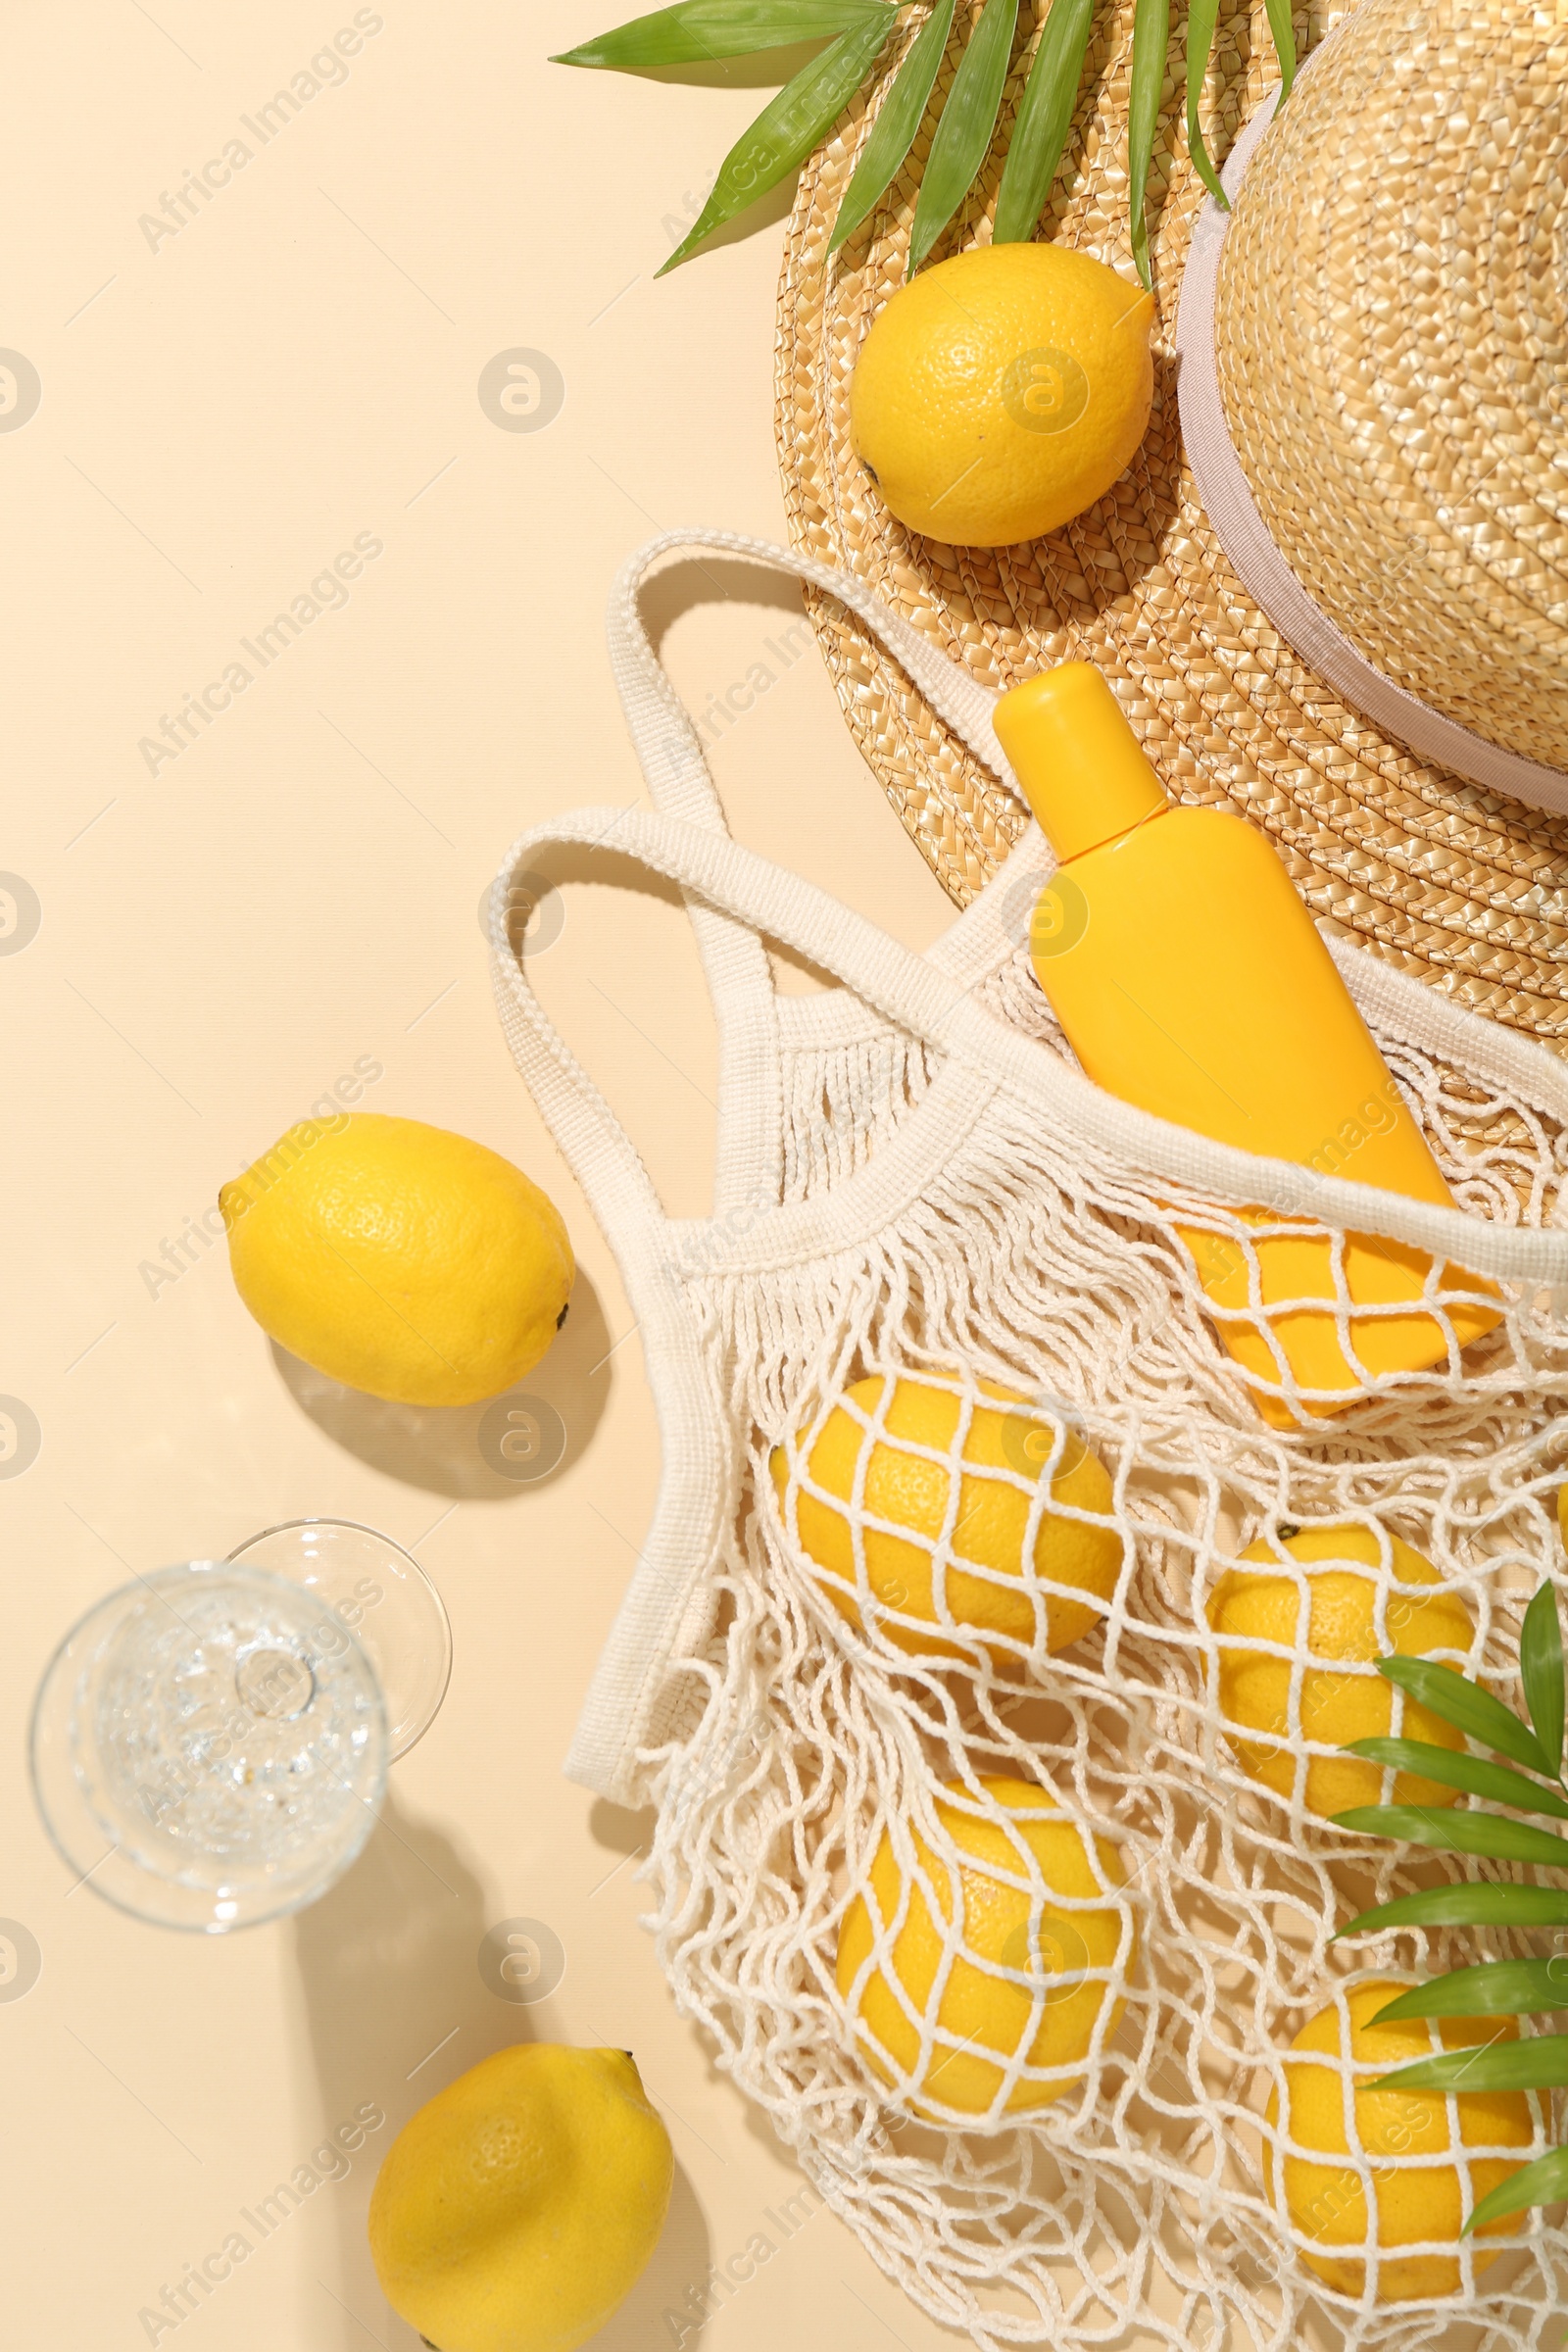 Photo of Fresh lemons, beach accessories in string bag and glass of drink on beige background, flat lay